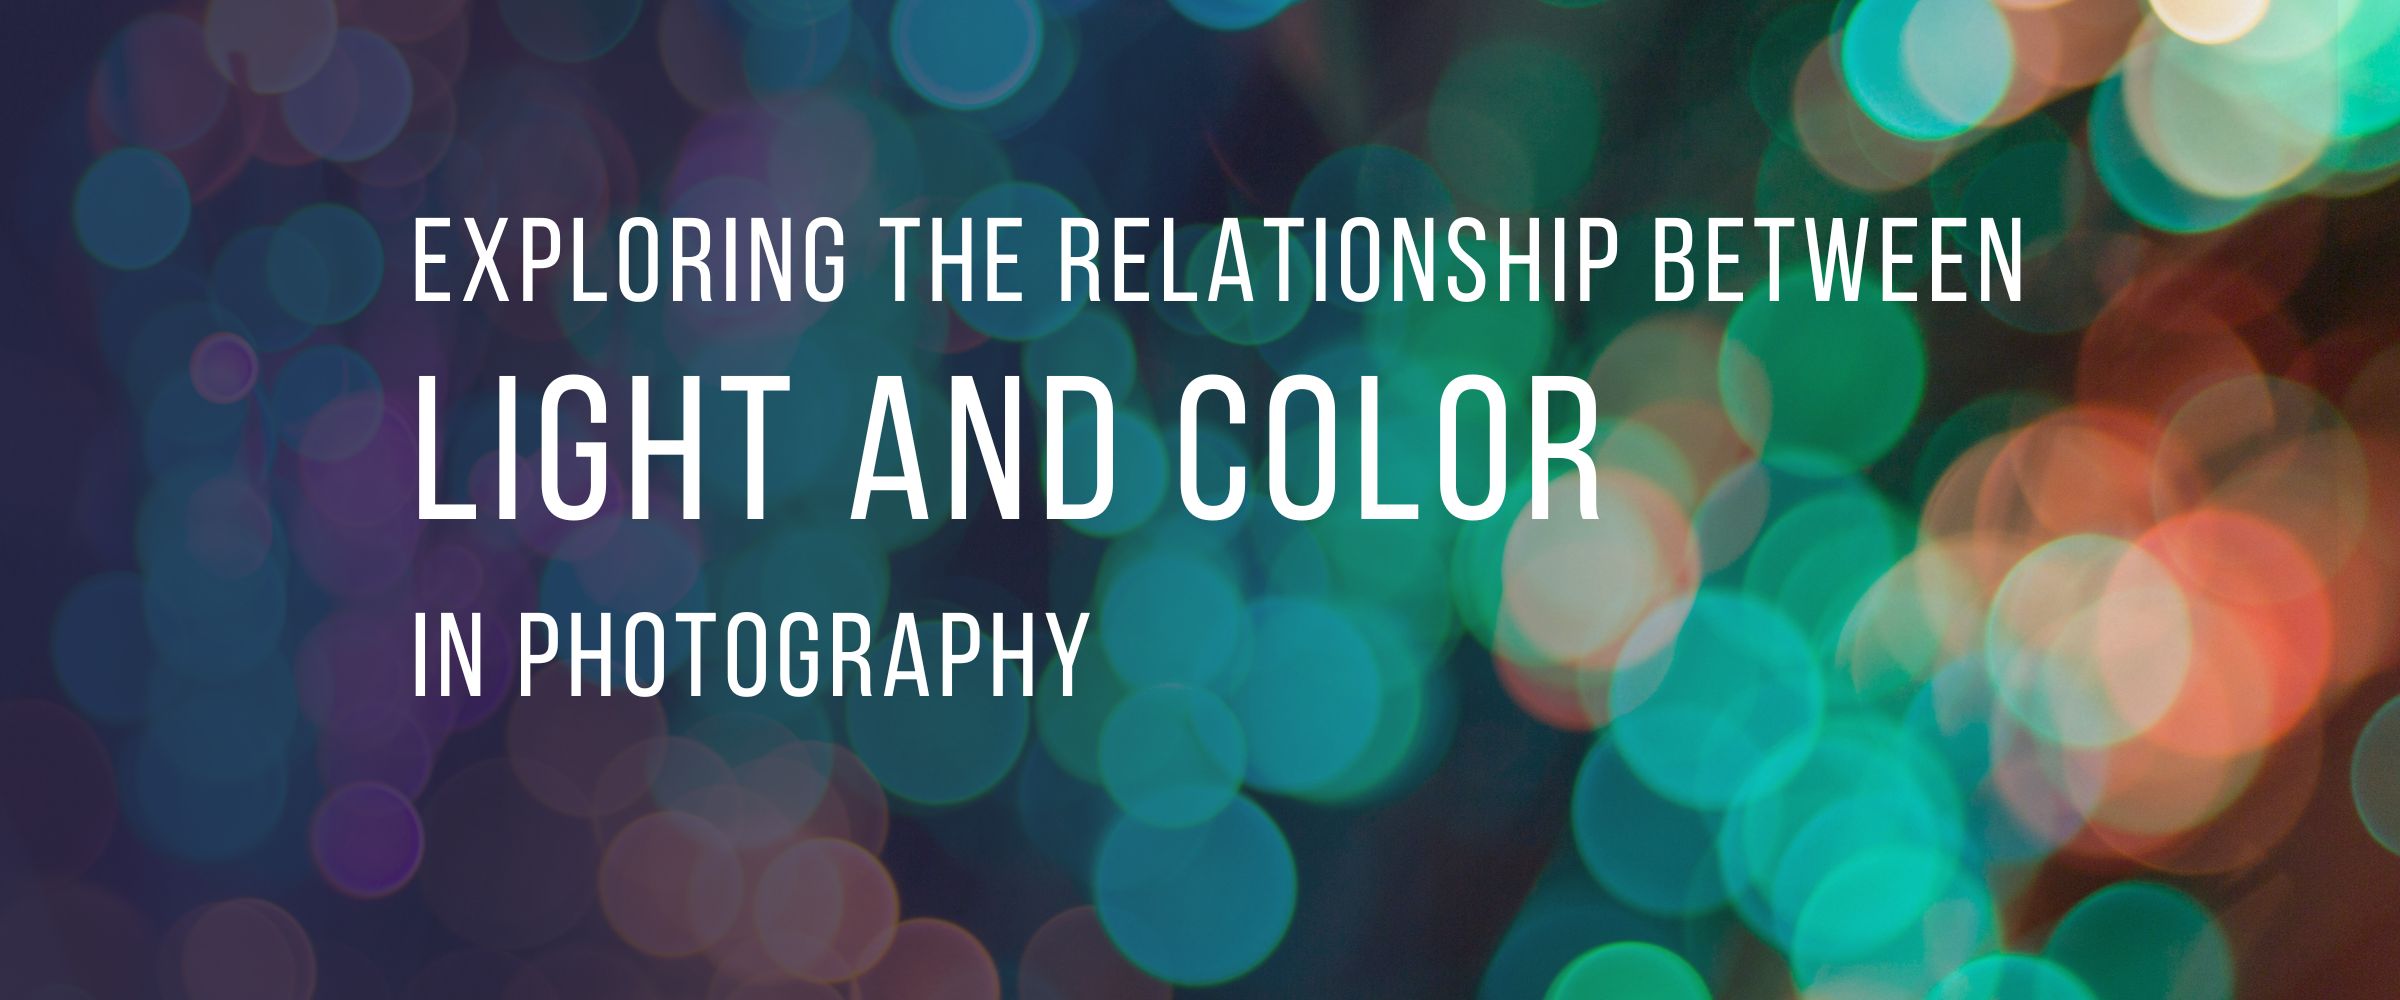 Exploring The Relationship Between Light And Color In Photography